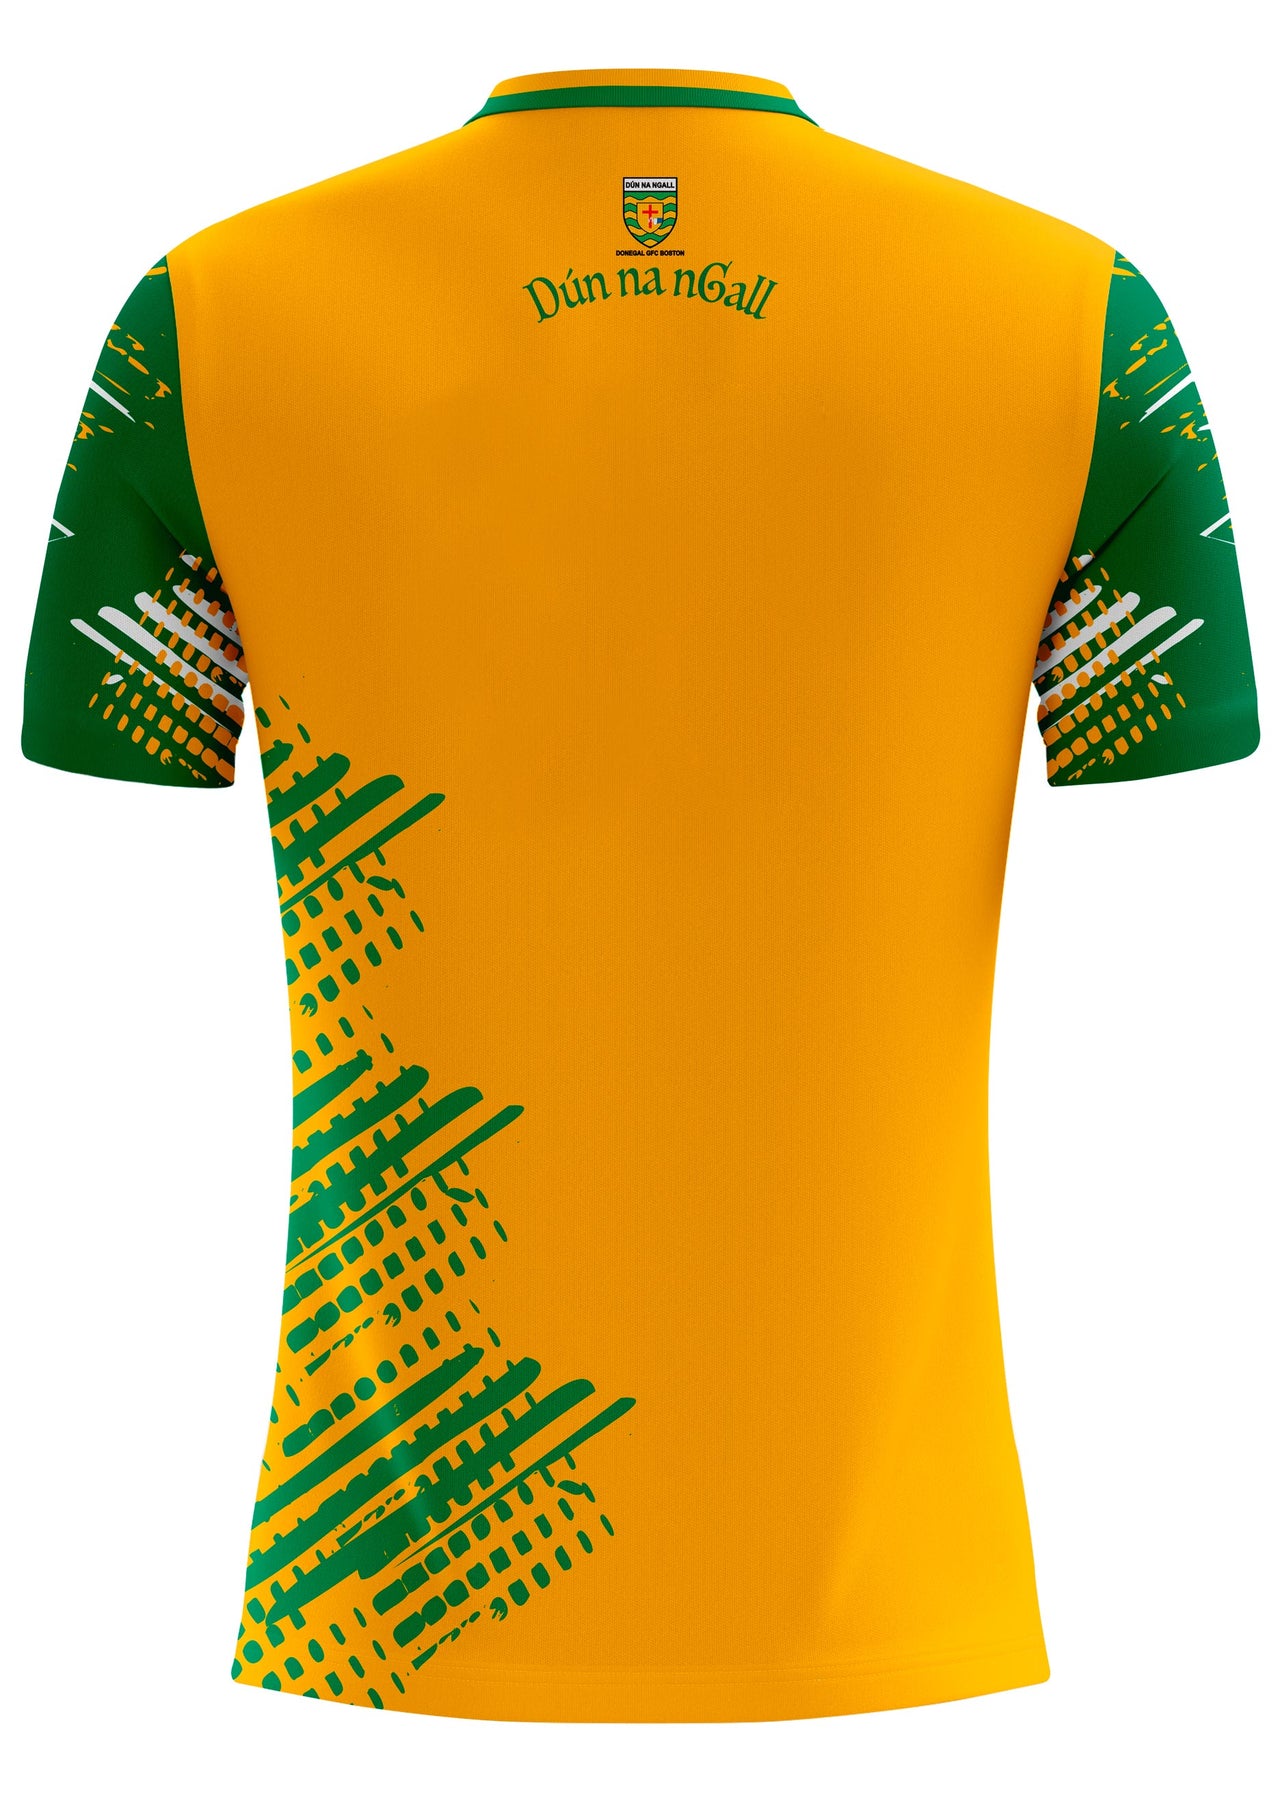 Donegal Boston Senior Team Jersey Player Fit Adult